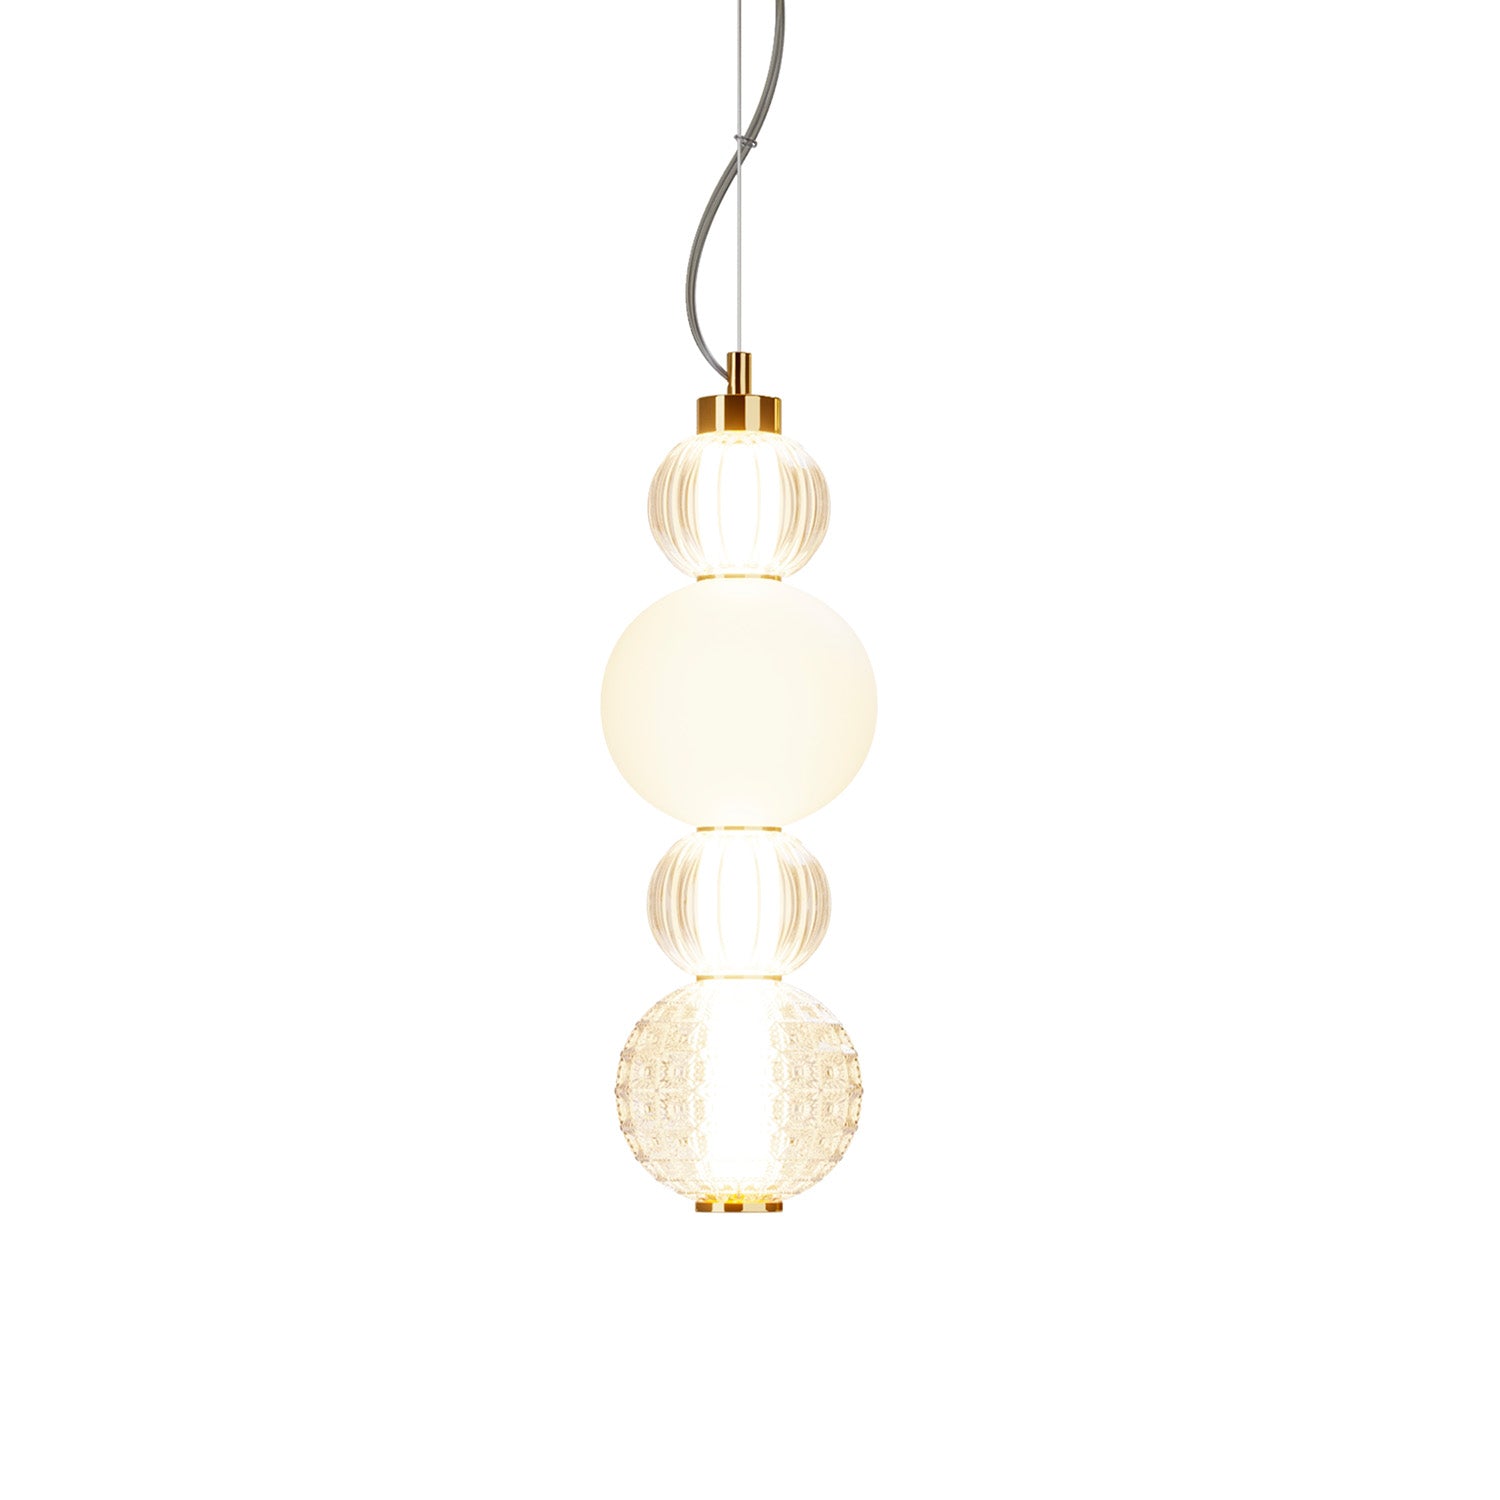 COLLAR - Vintage glass pendant light with integrated LED